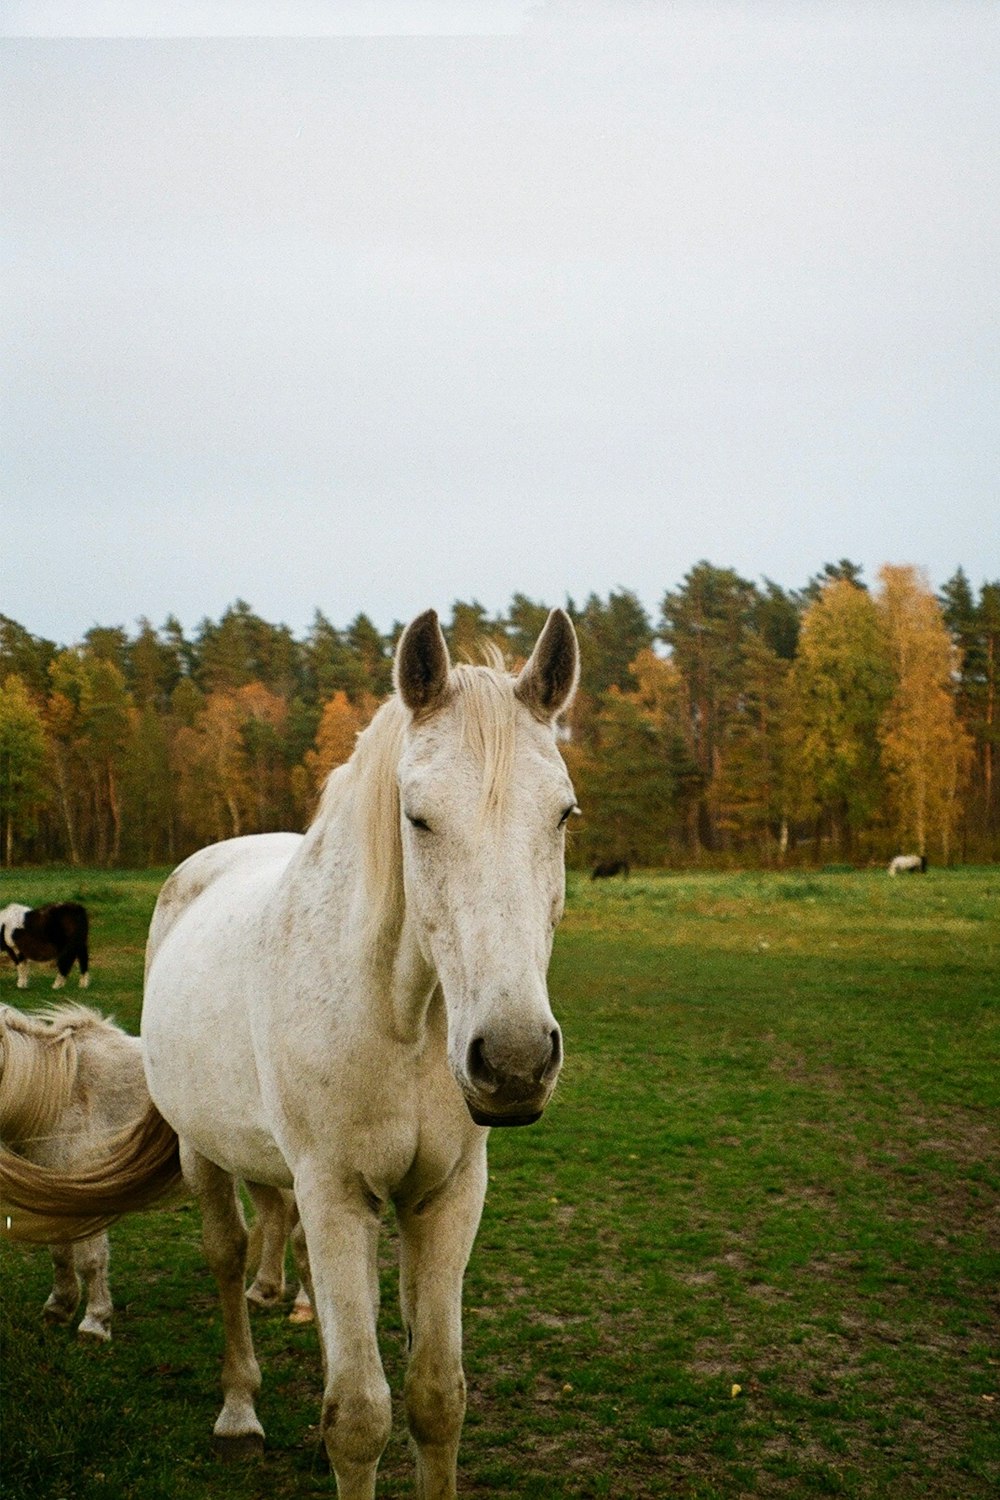 a white horse standing next to a white horse on a lush green field